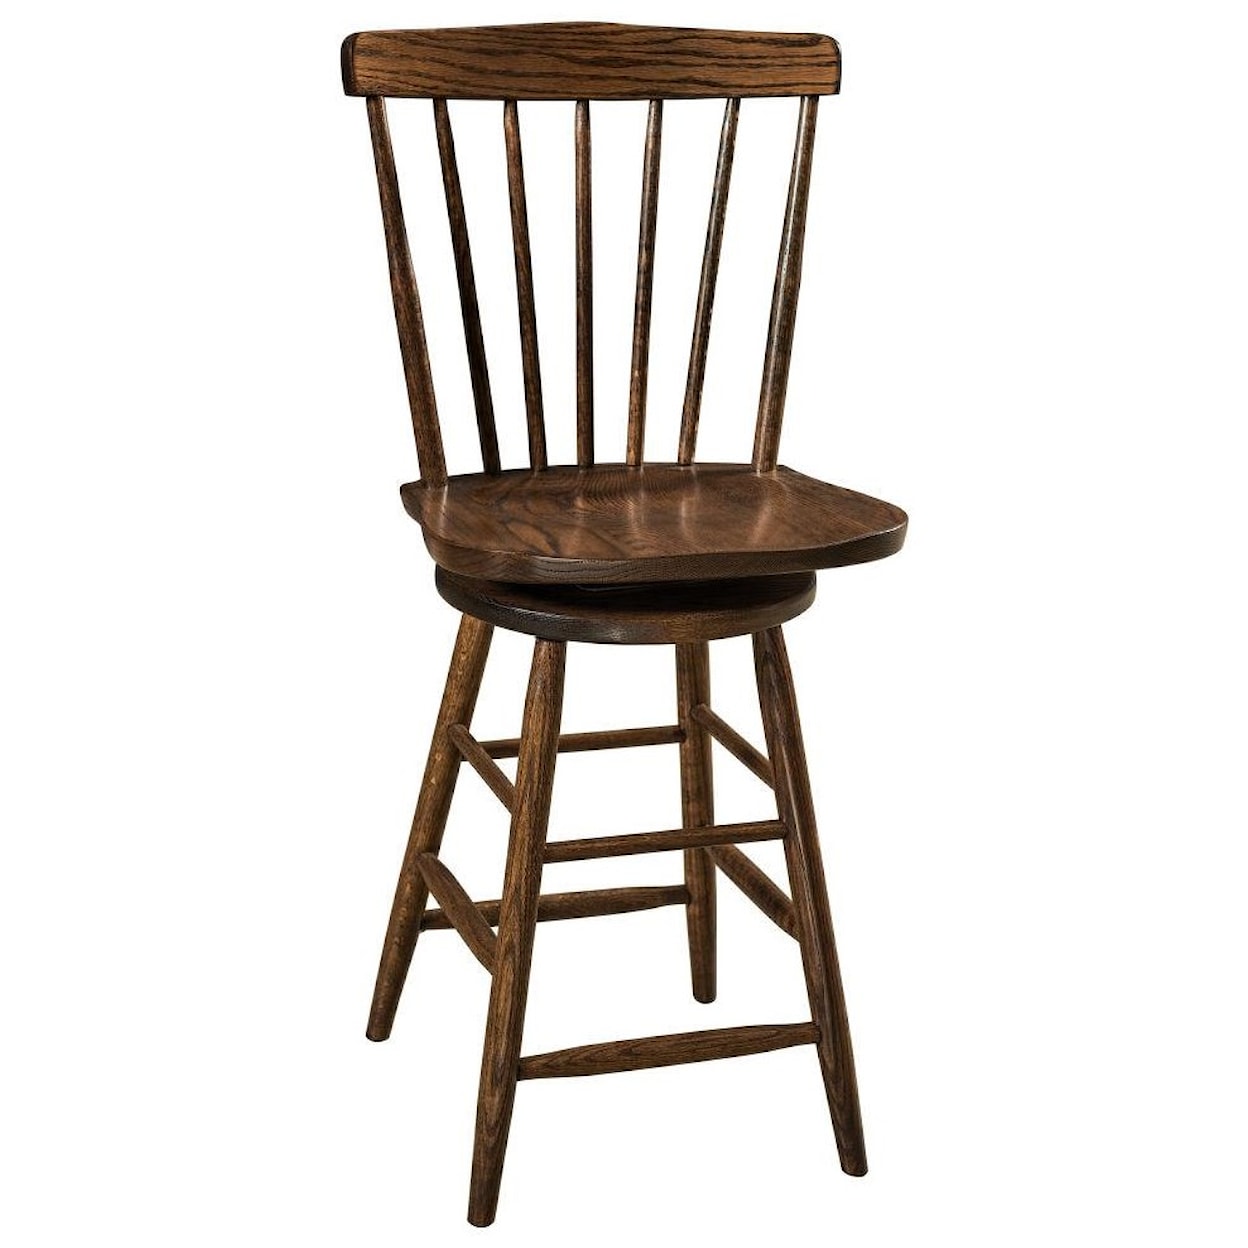 F&N Woodworking Cantaberry 24" Swivel Stool